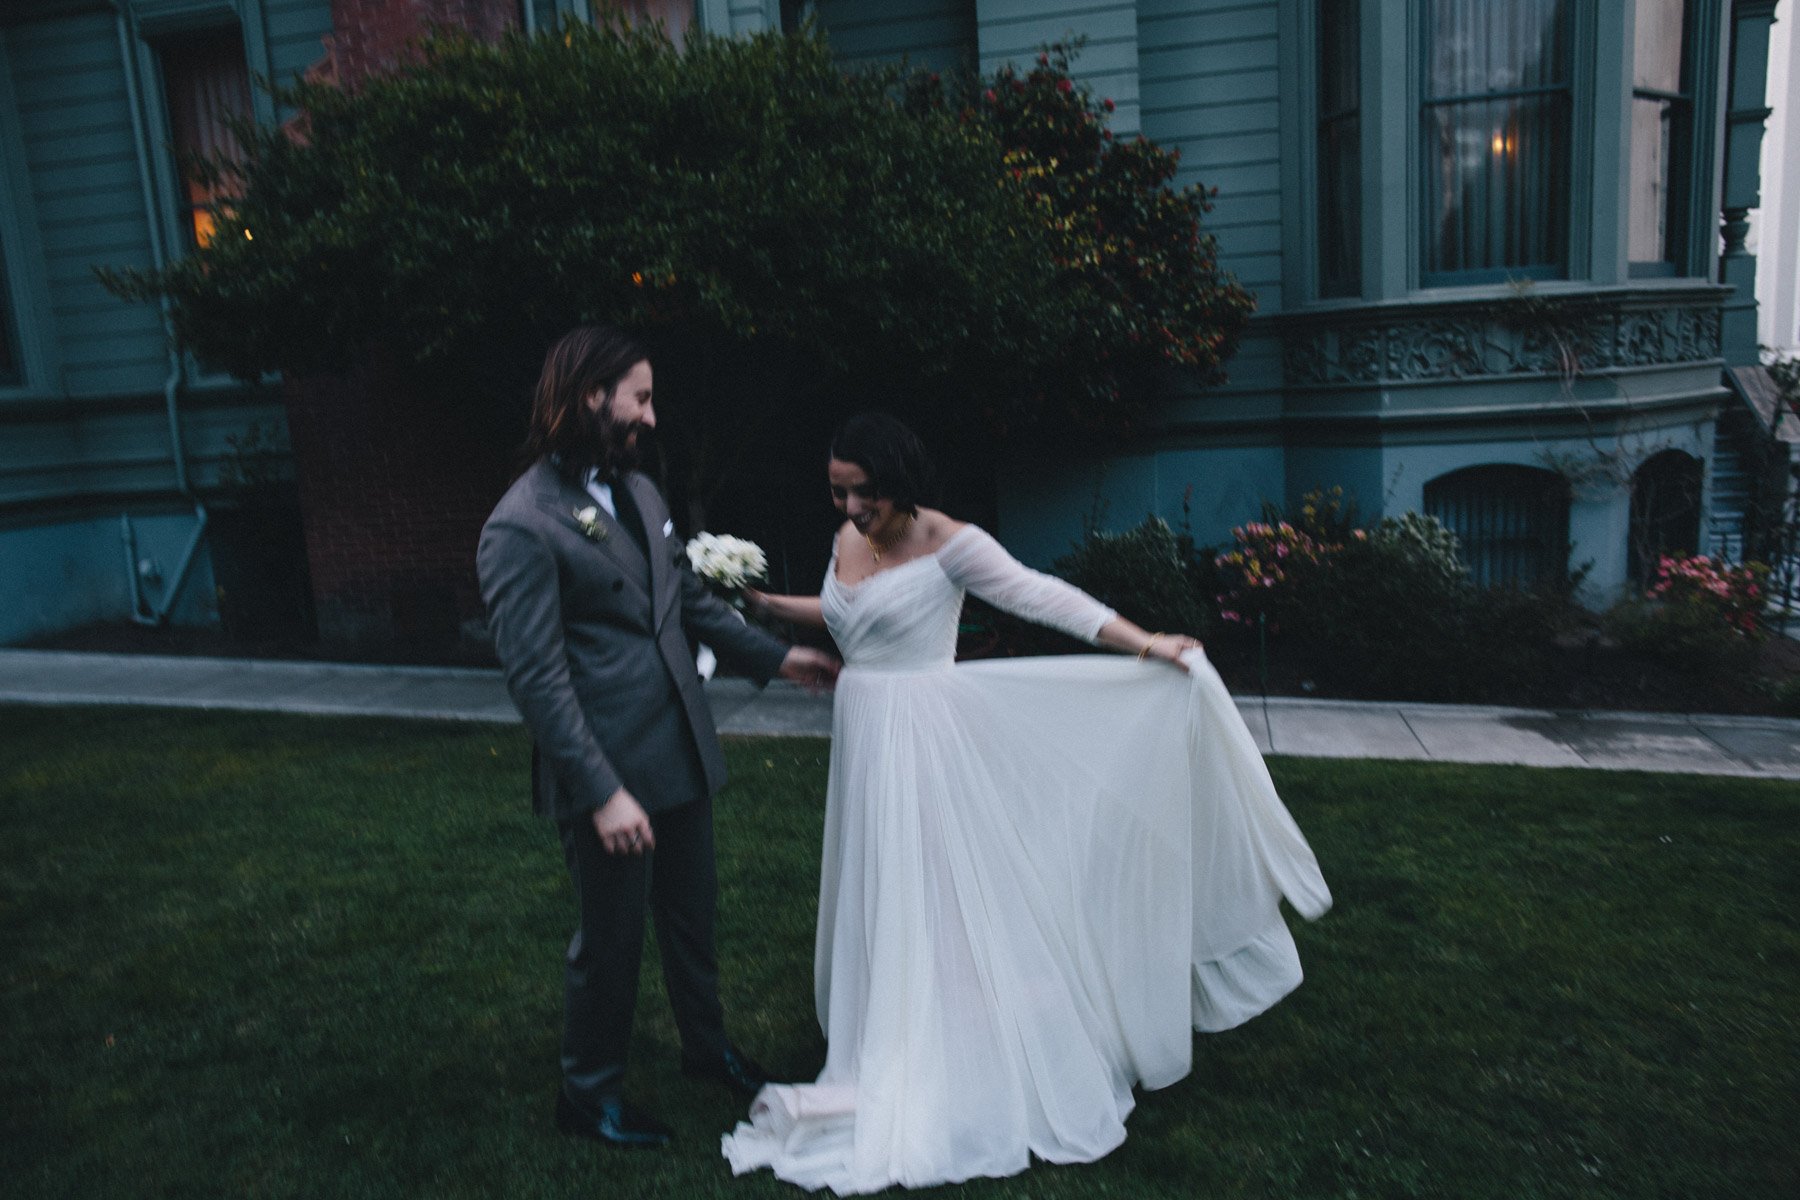 A bride and groom after their wedding ceremony in front of Haas-Lilienthal House